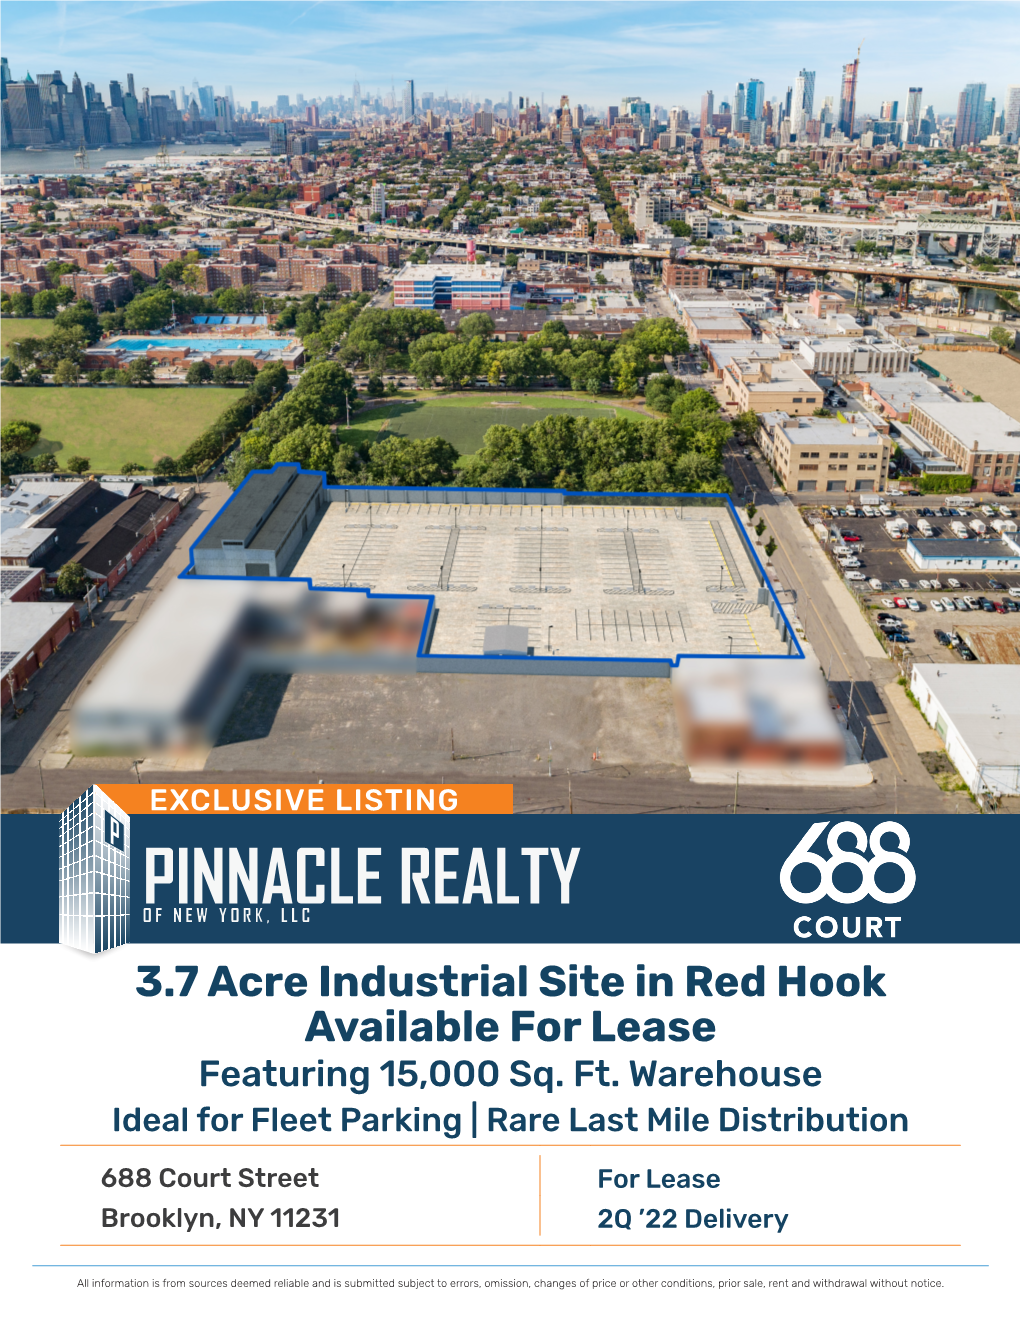 3.7 Acre Industrial Site in Red Hook Available for Lease Featuring 15,000 Sq